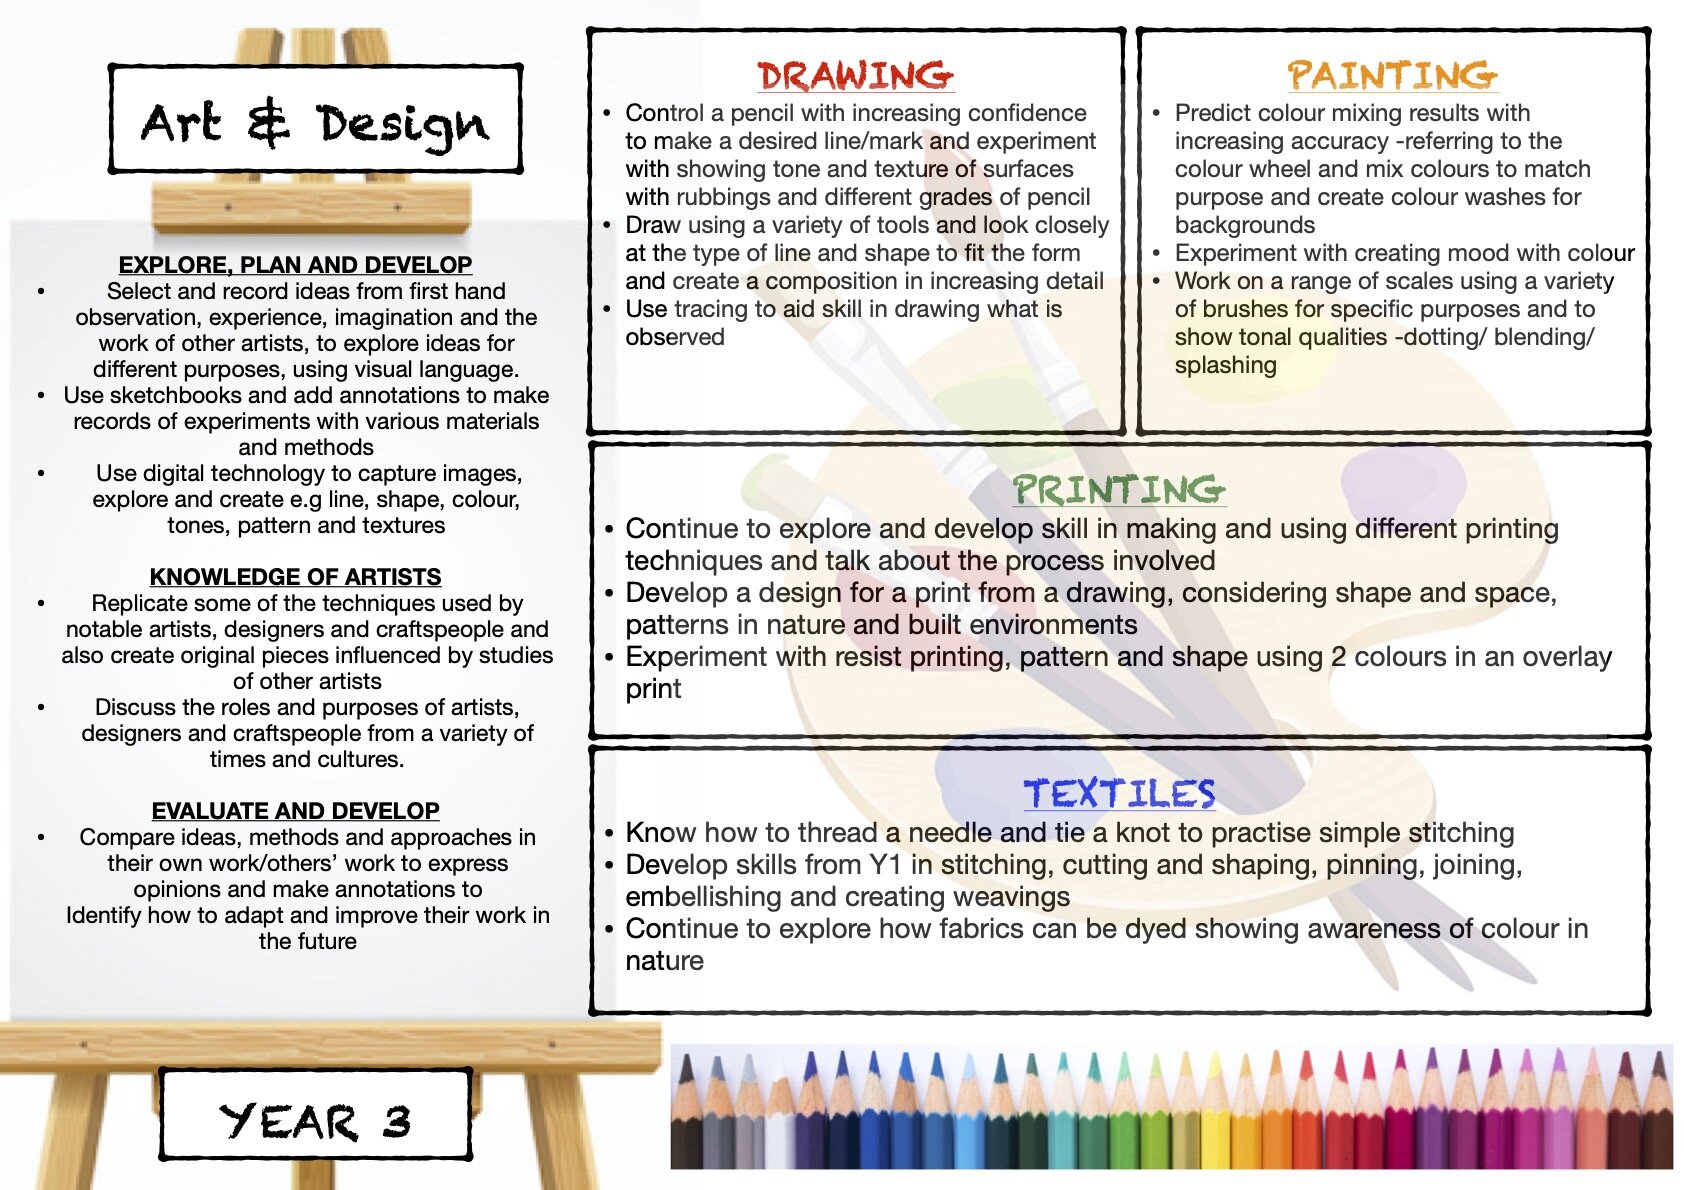 Art and Design Overview